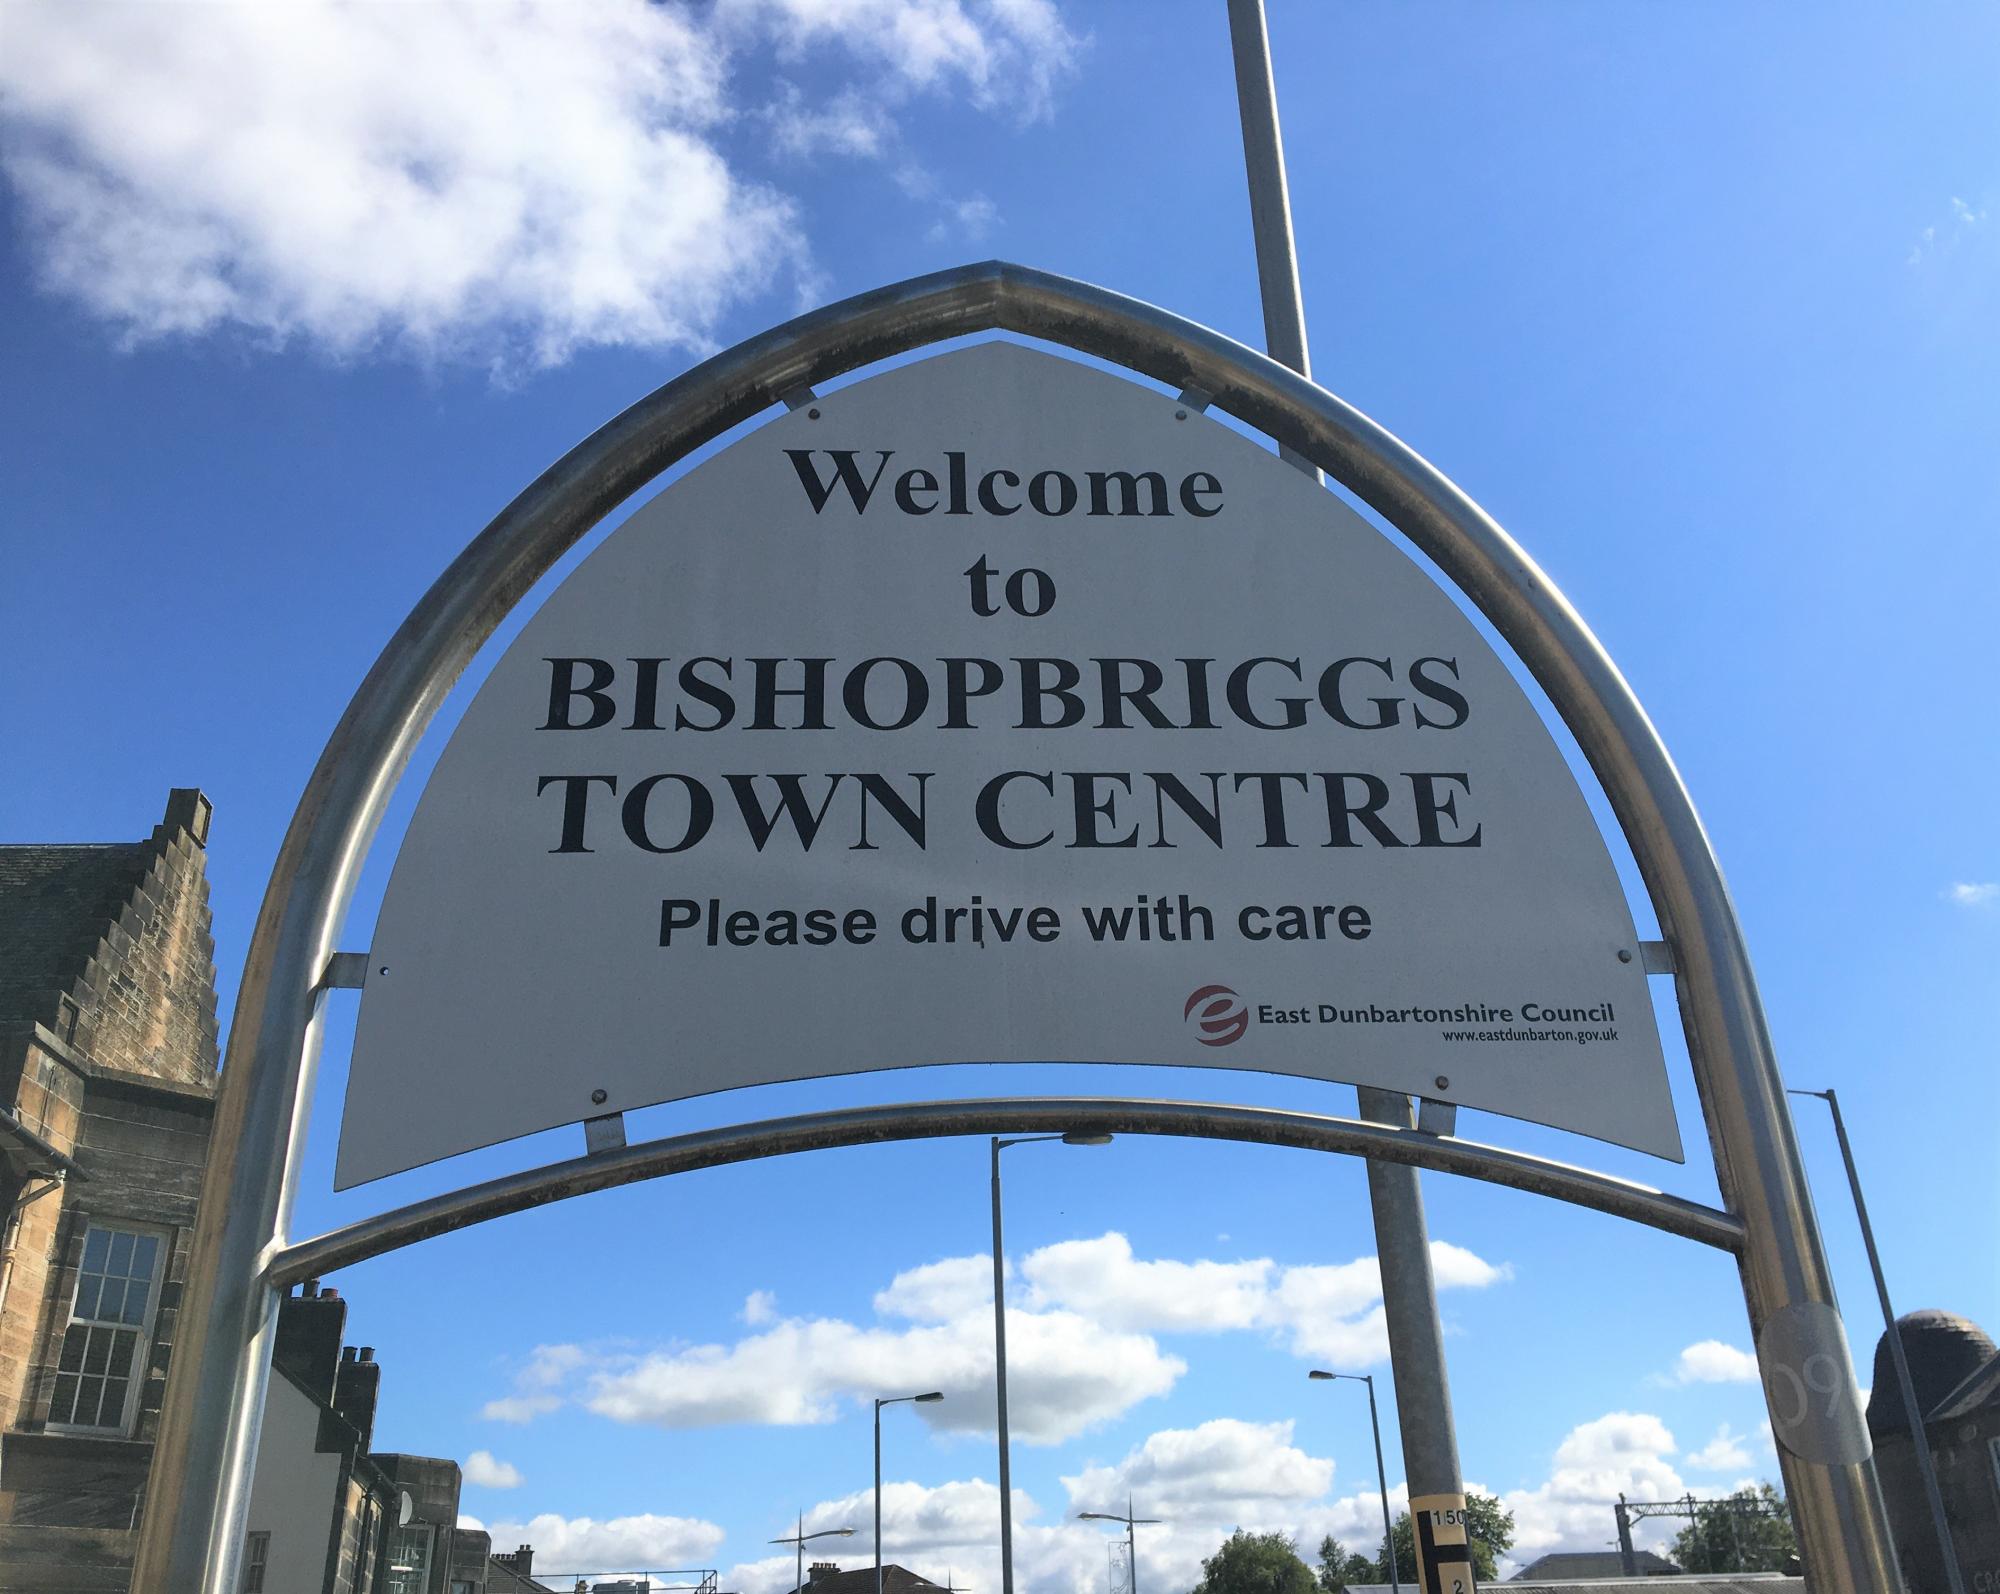 Bishopbriggs welcome sign